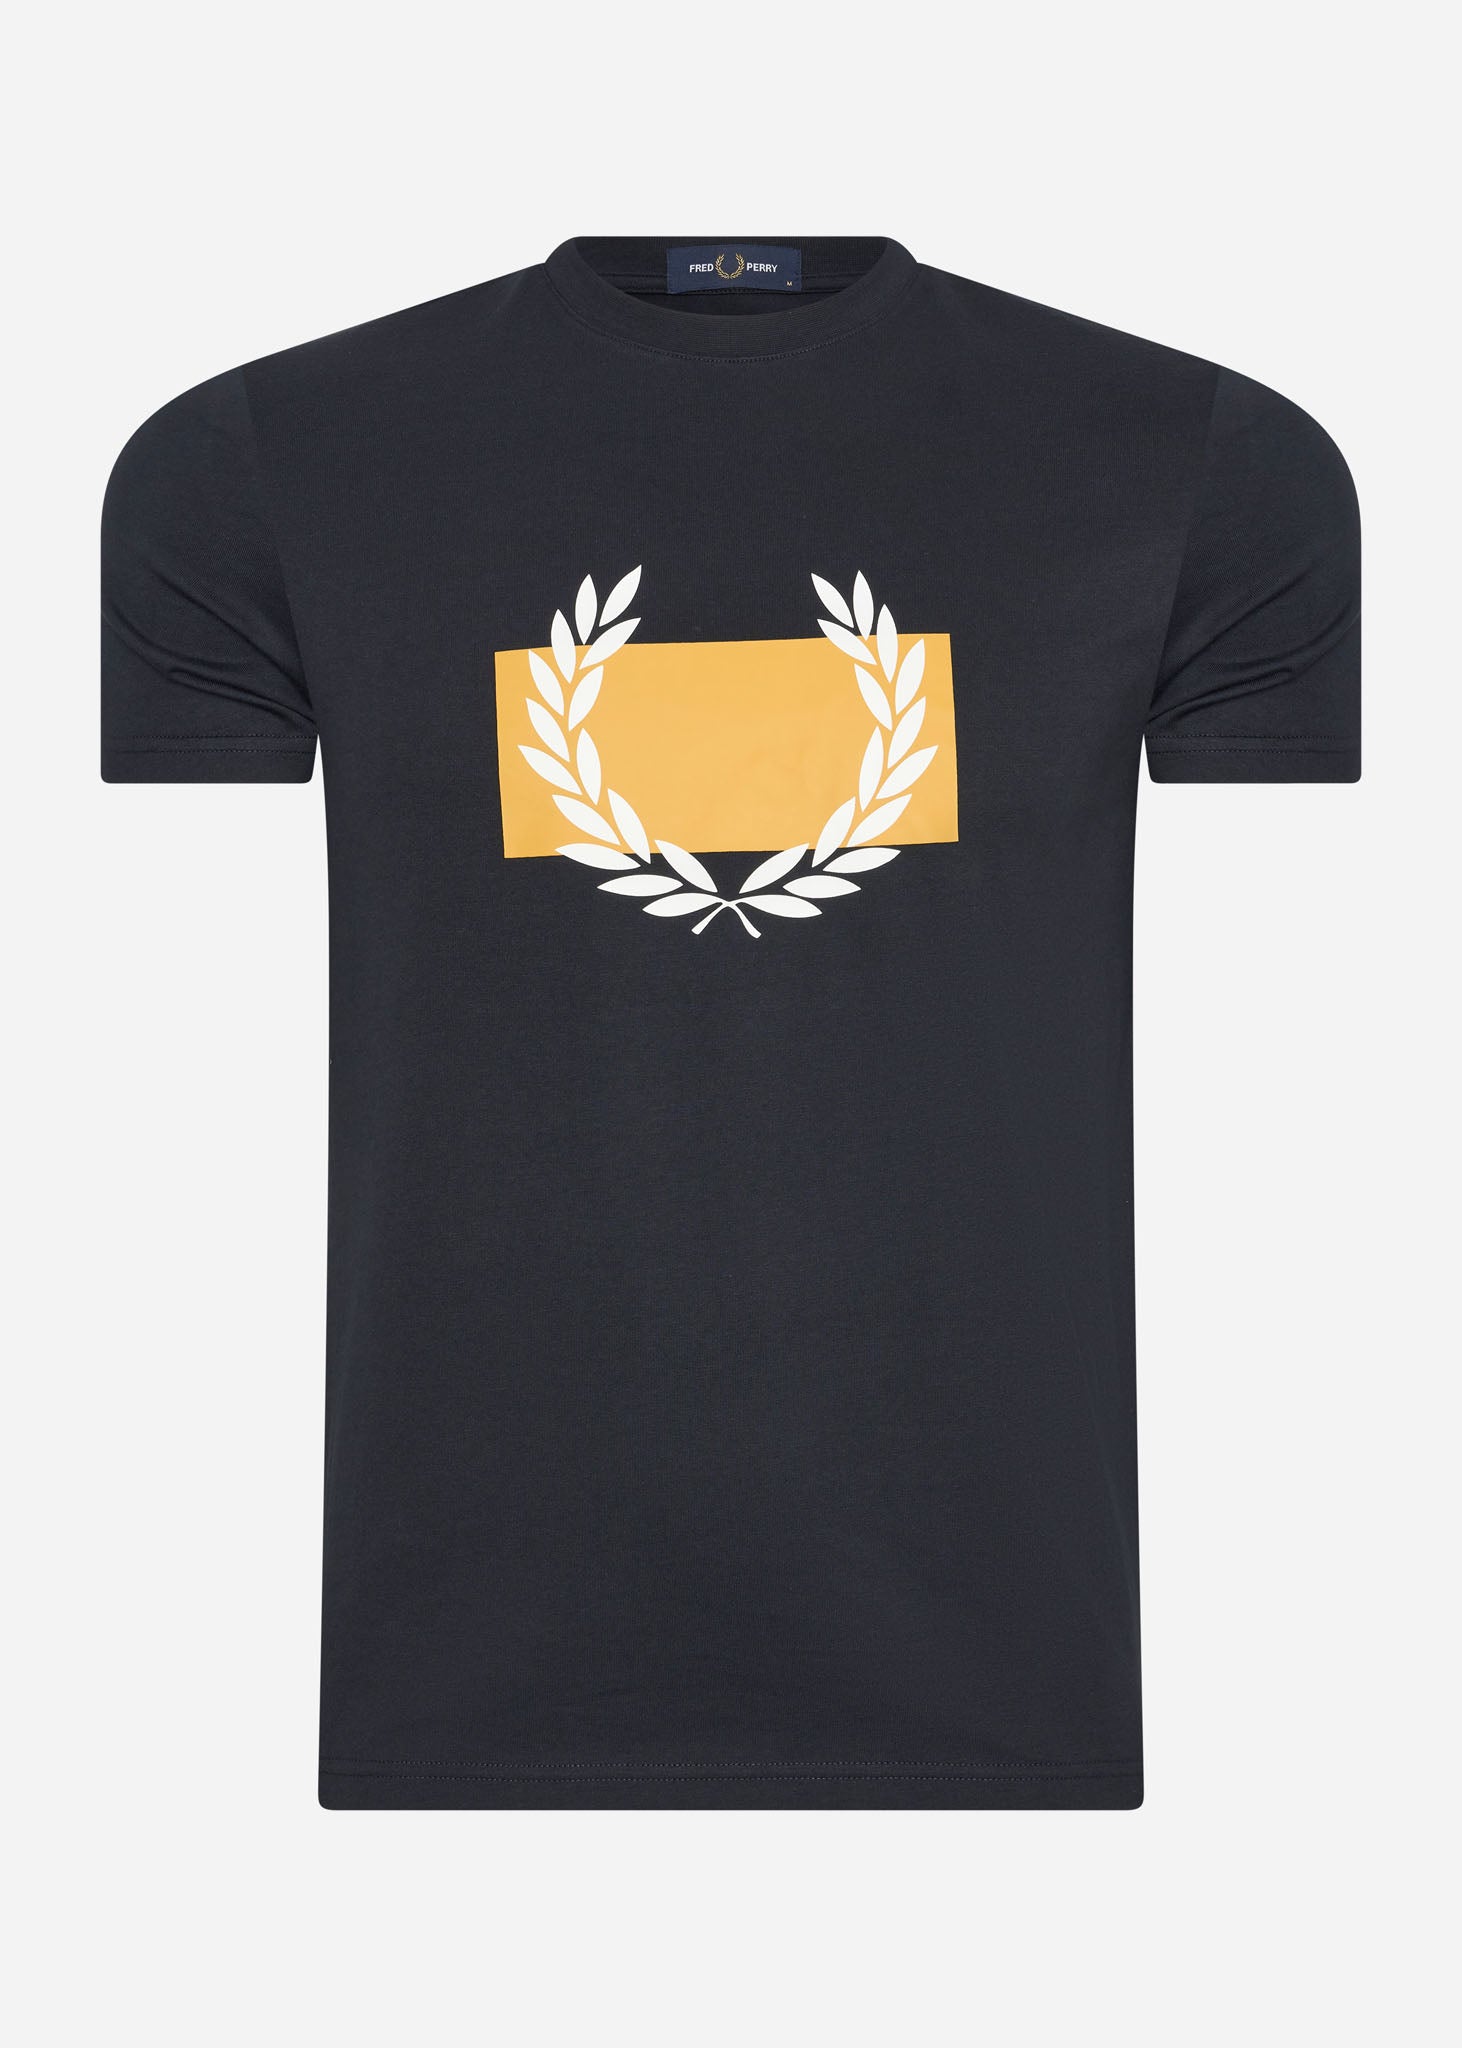 Fred Perry T-shirts  Laurel wreath print t-shirt - navy 